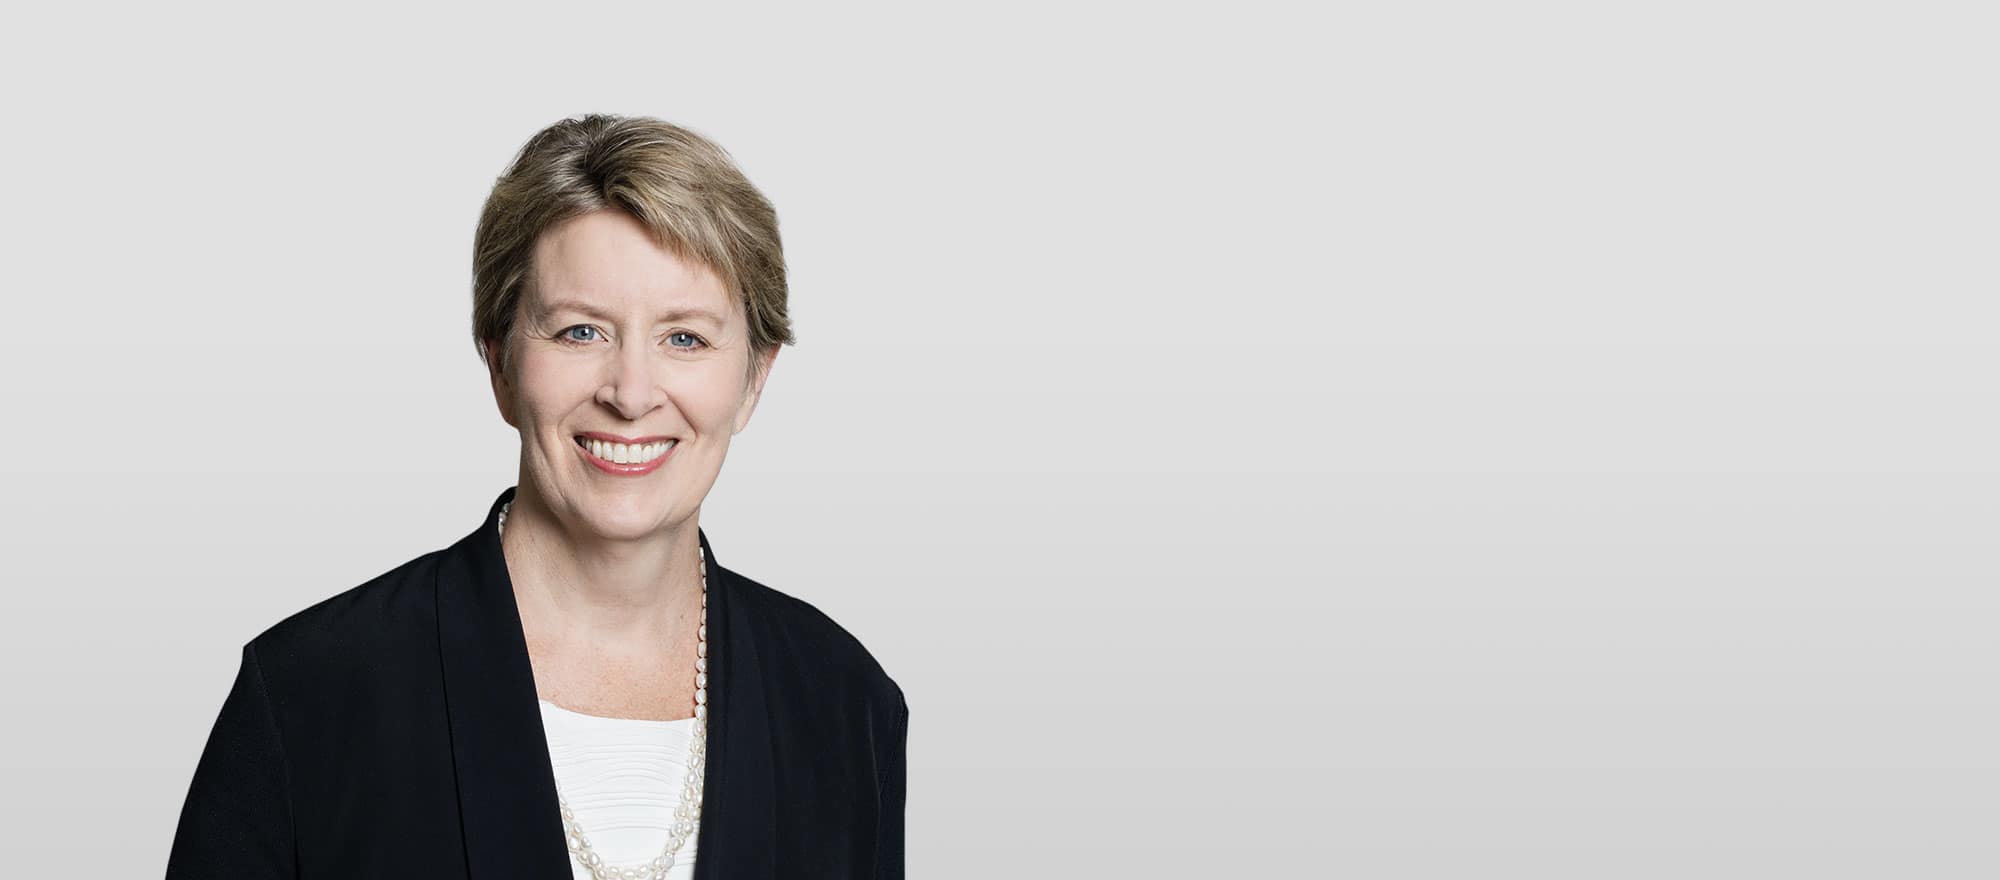 Mary Hamilton is a lawyer and partner at Alexander Holburn, a Vancouver law firm